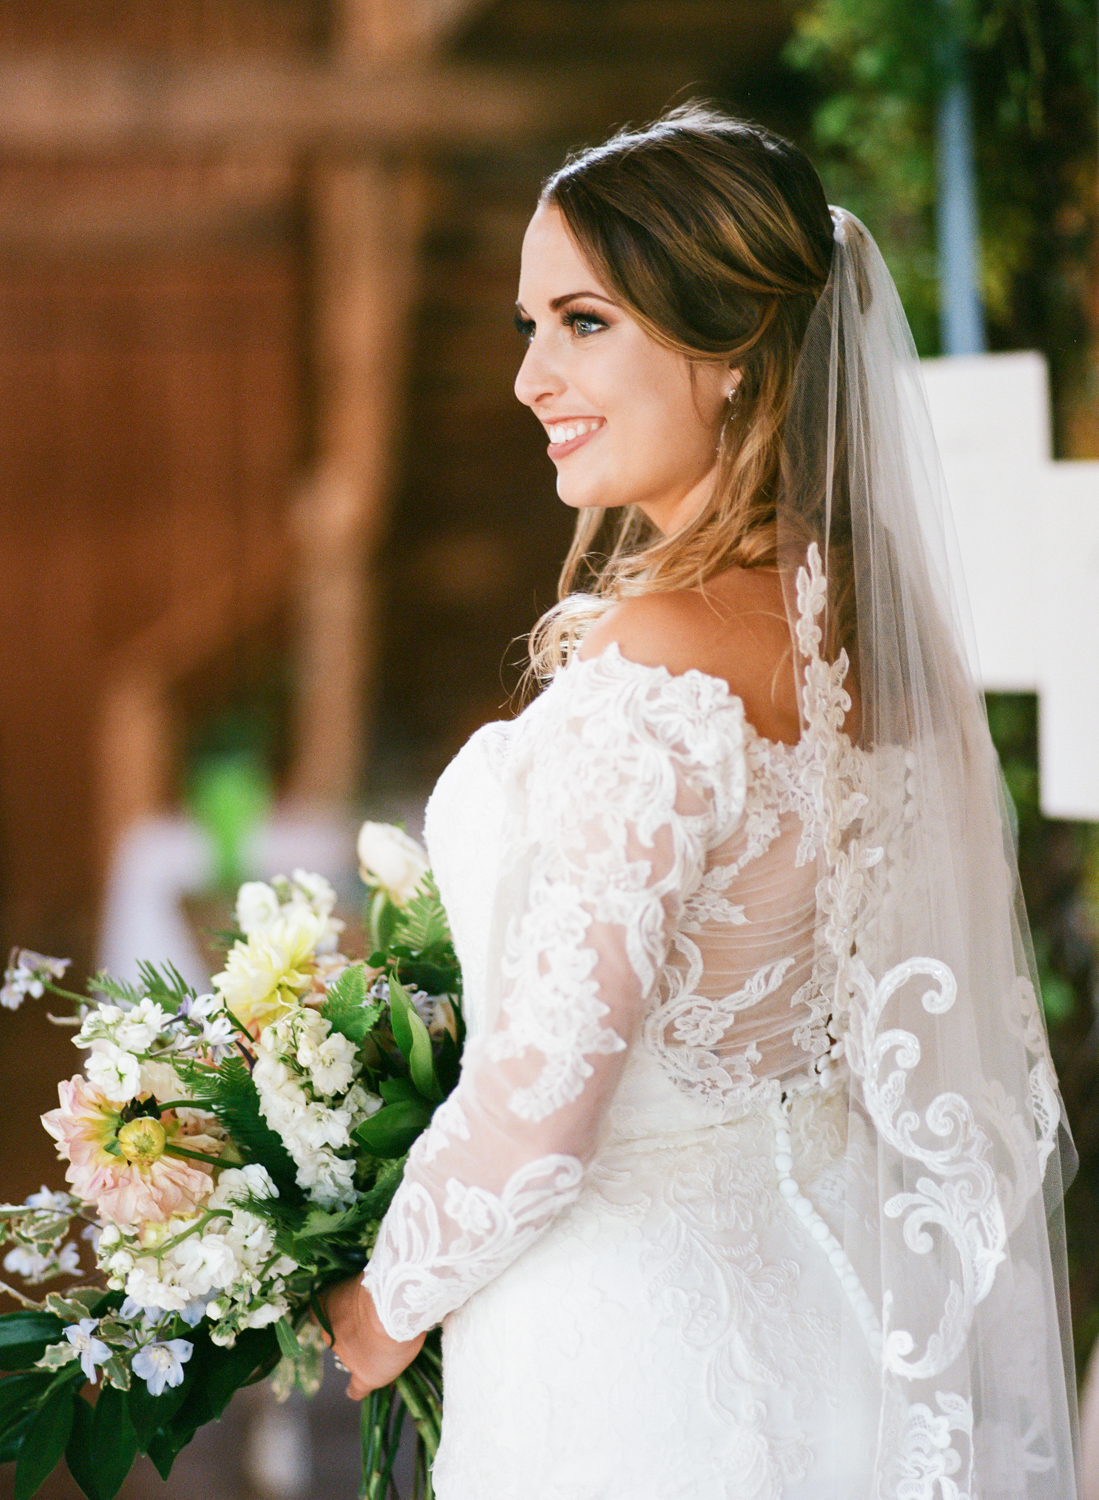 Bride wearing lace gown by Mimi's Bridal, St. Louis Fine Art Film Wedding Photographer, Erica Robnett Photography